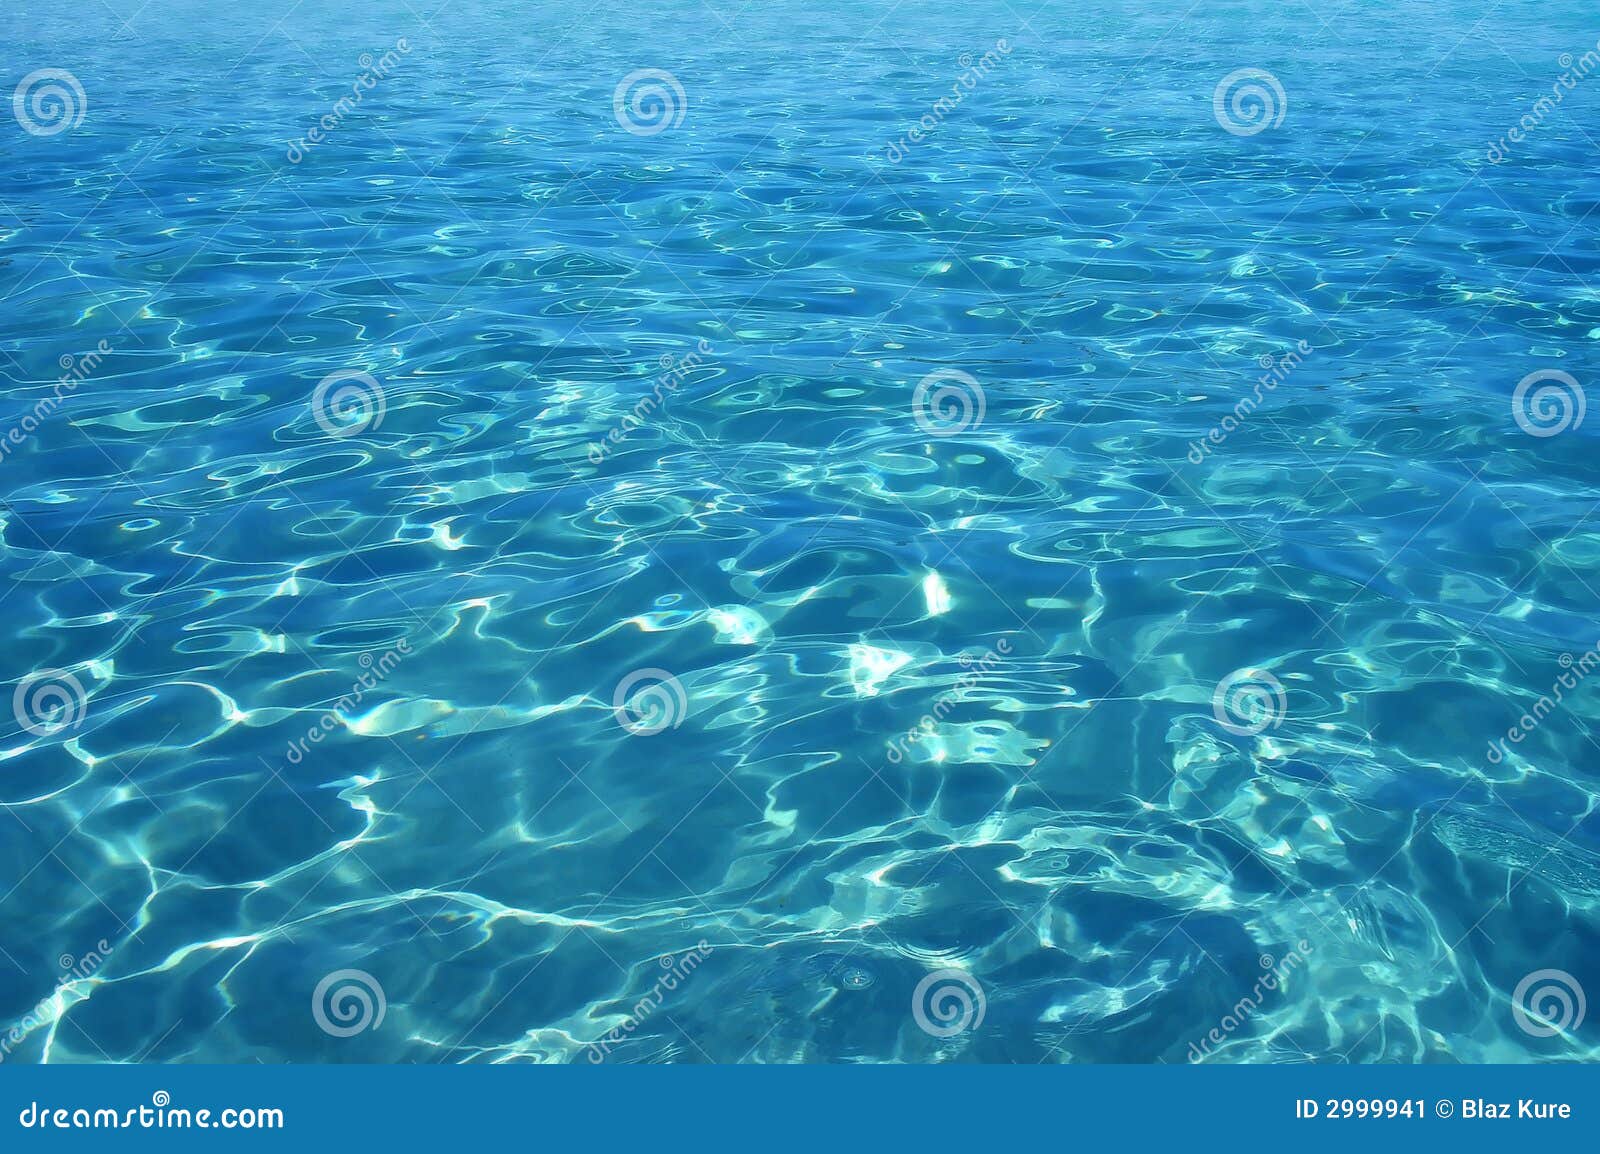 water surface - texture